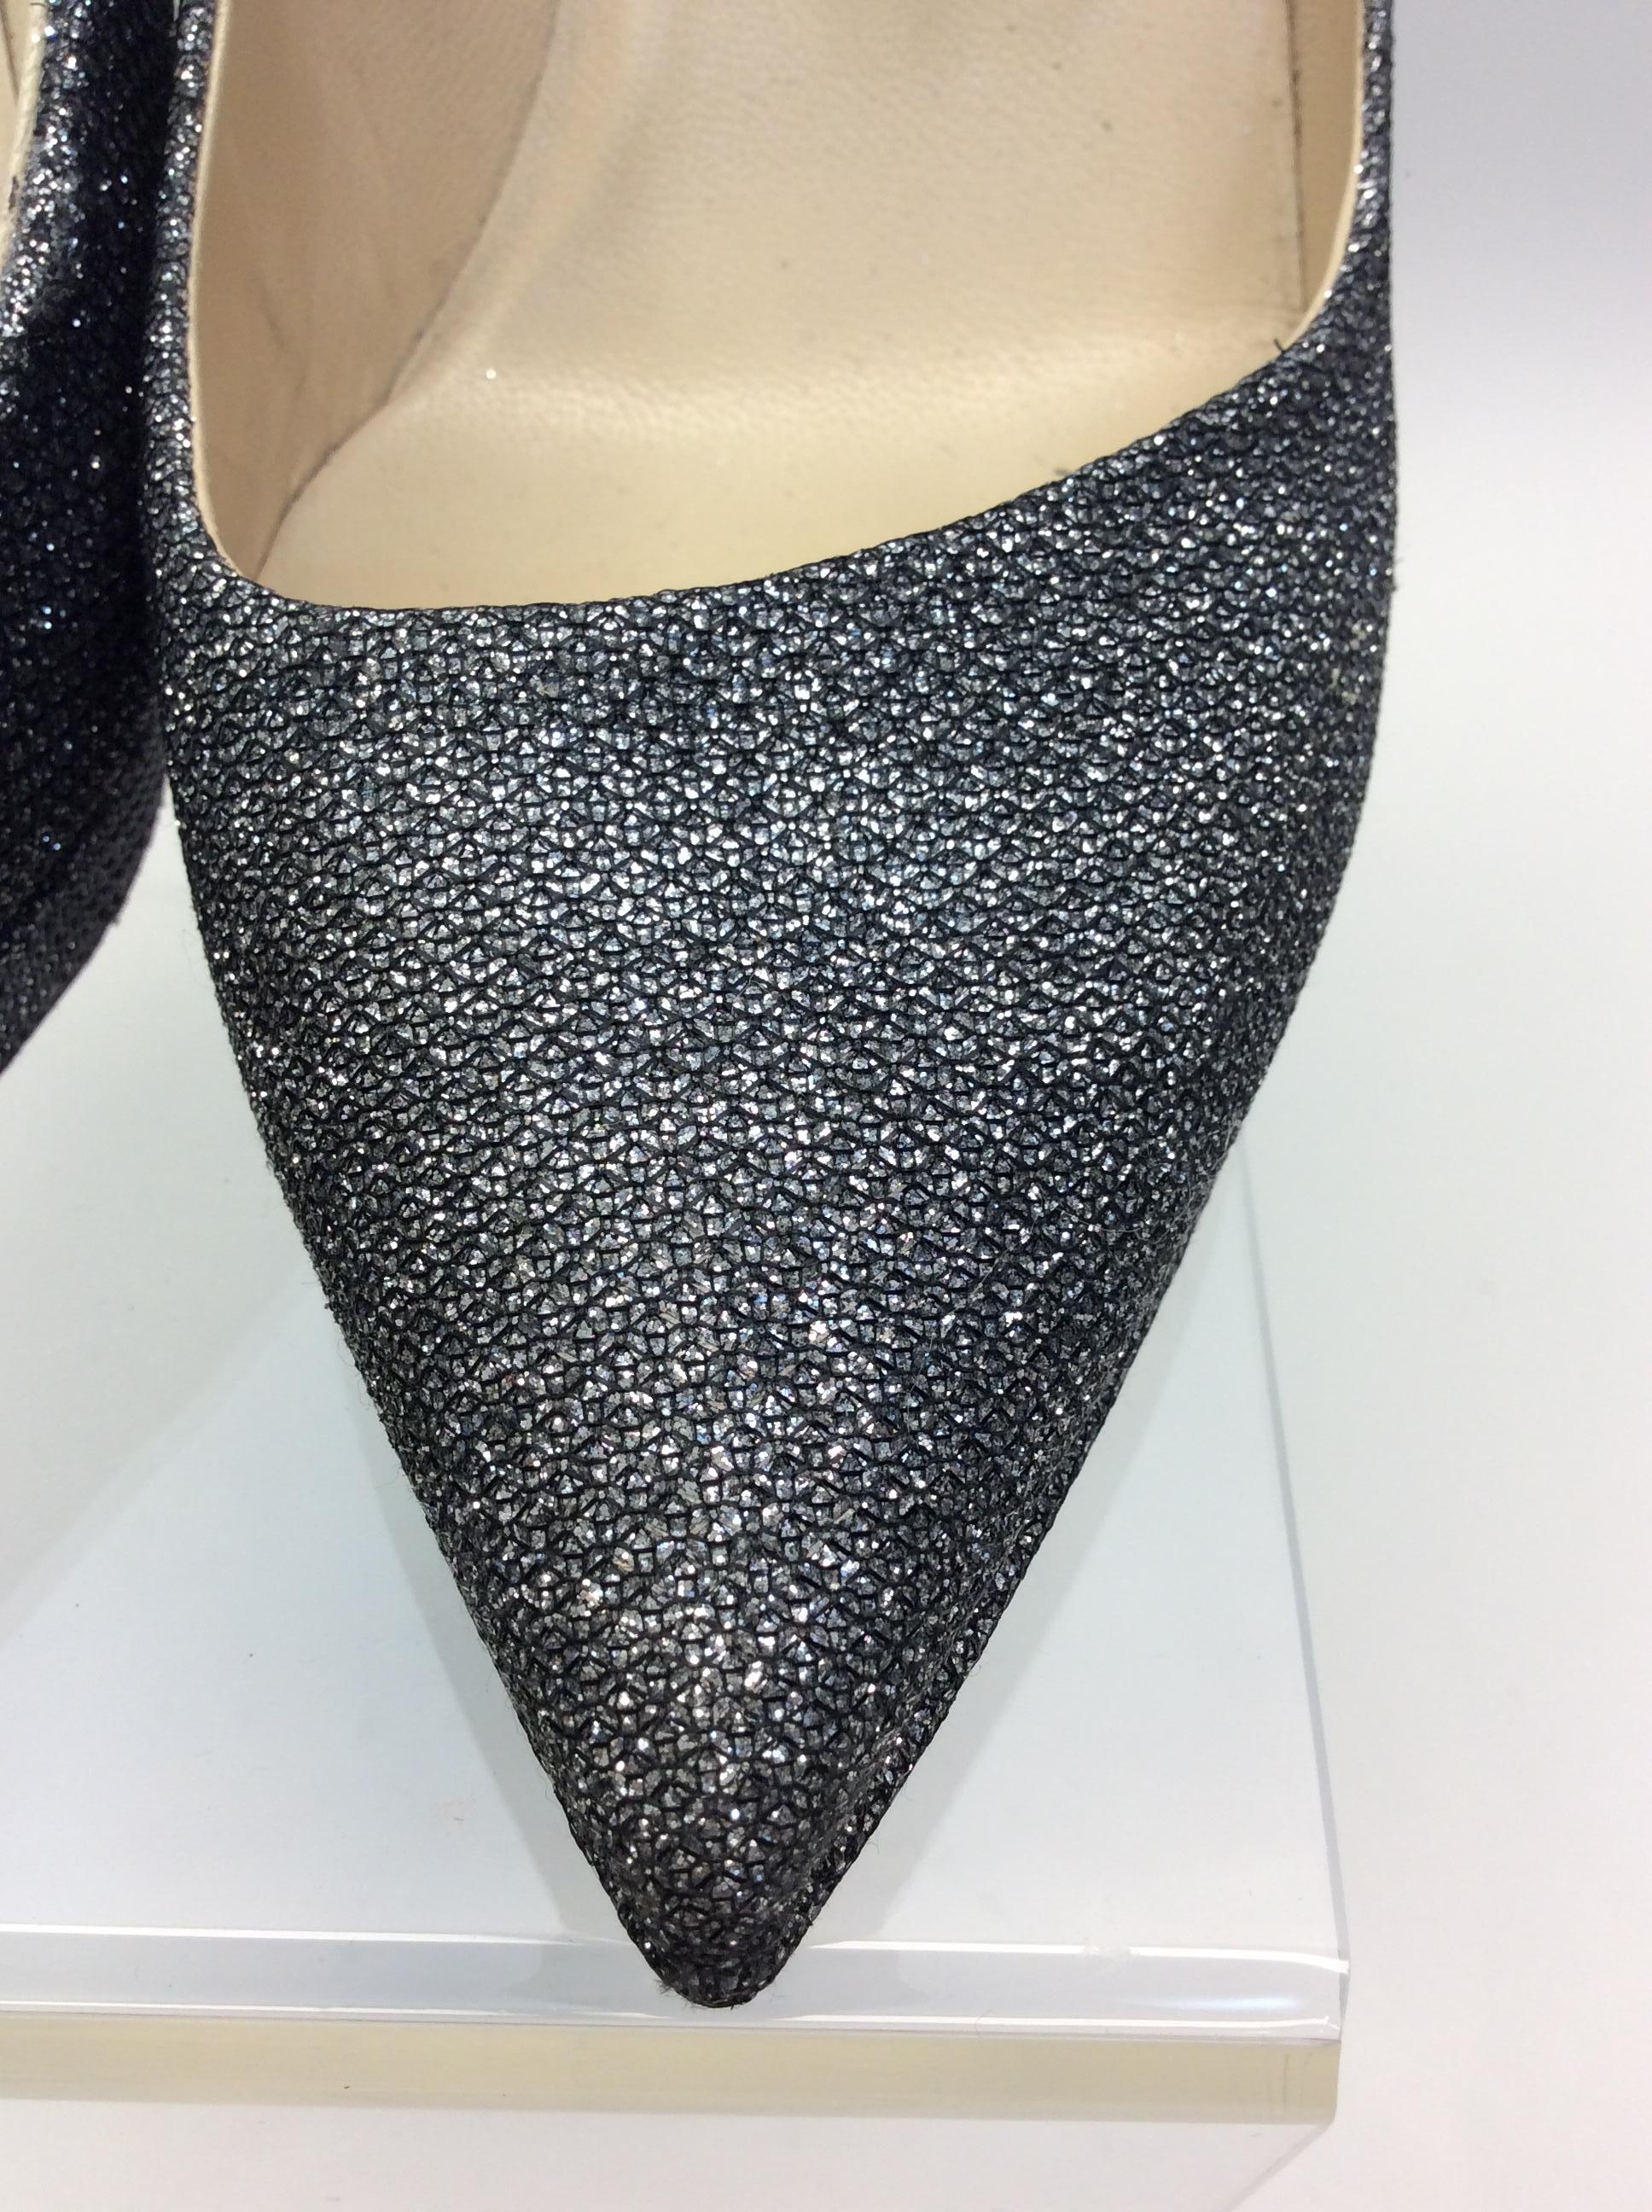 Jimmy Choo Silver Metallic Pump In Good Condition For Sale In Narberth, PA